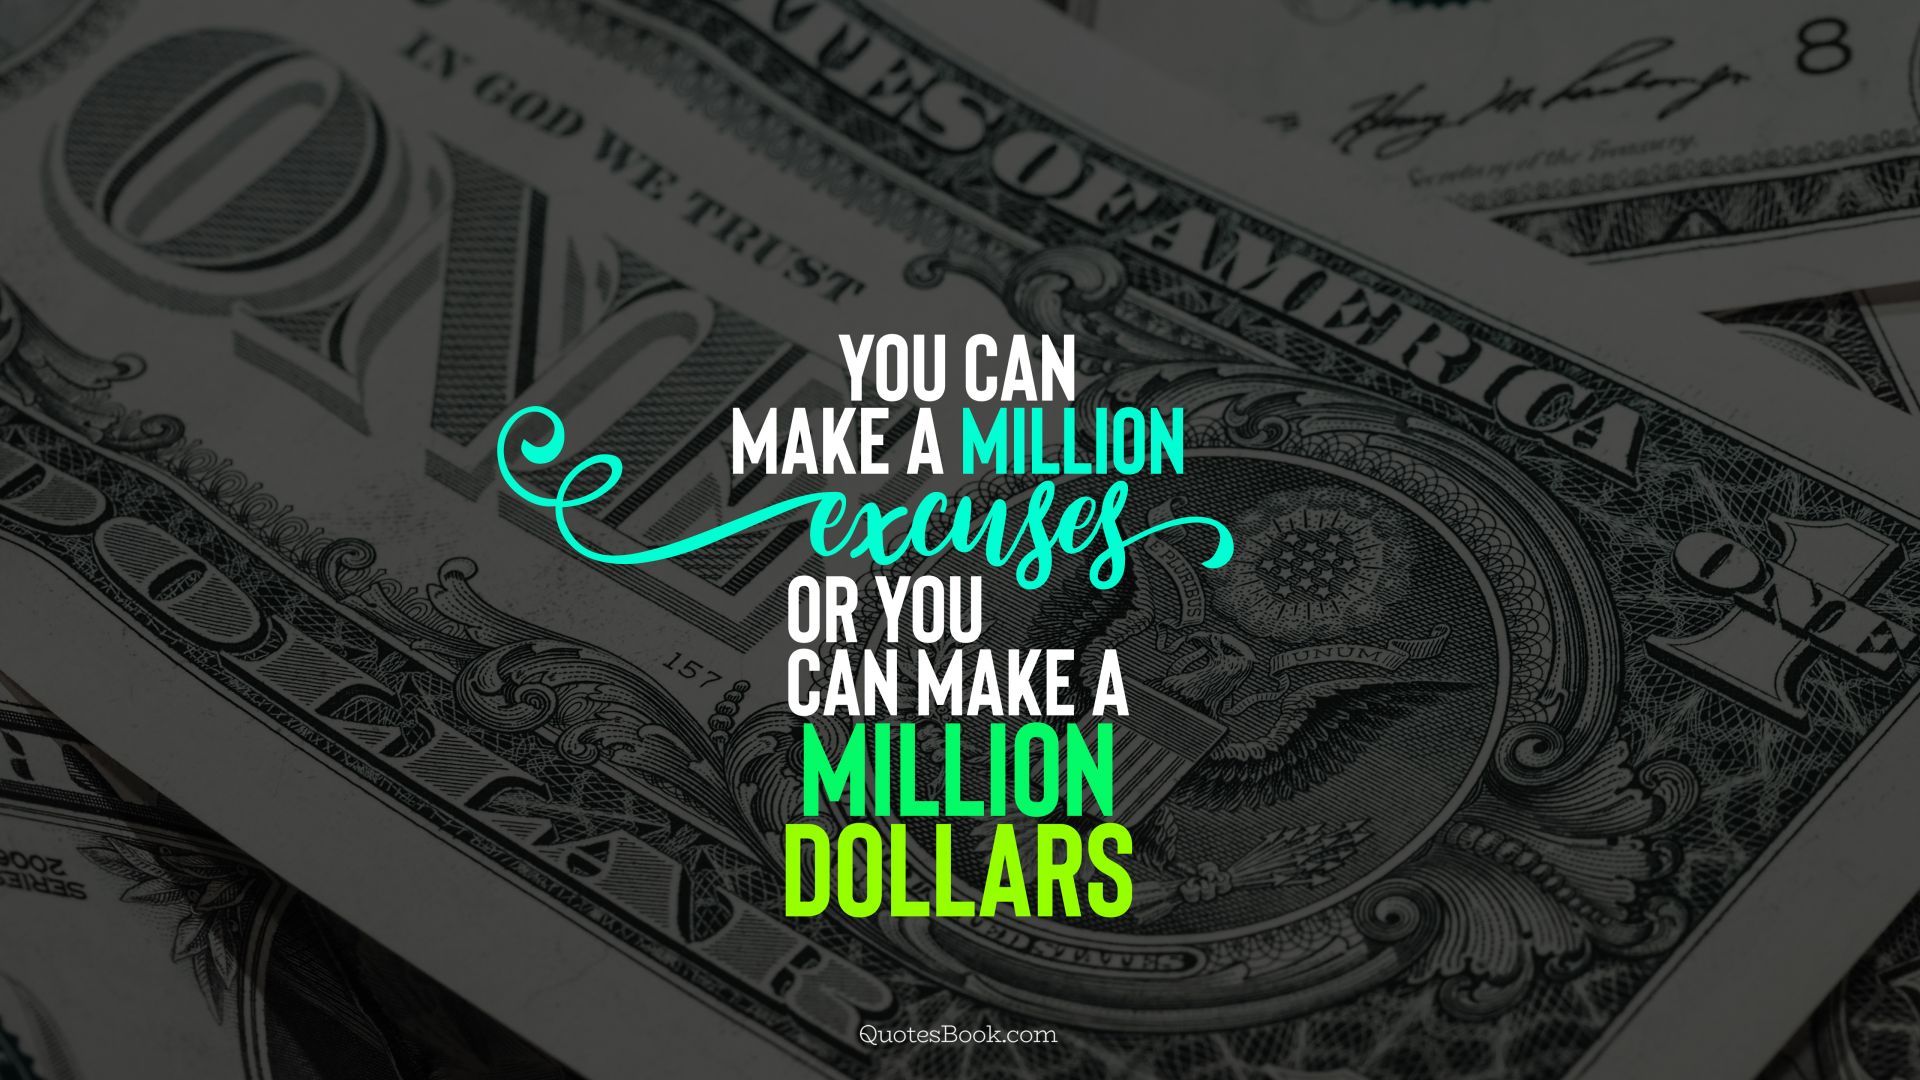 You can make a million excuses or you can make a million dollars